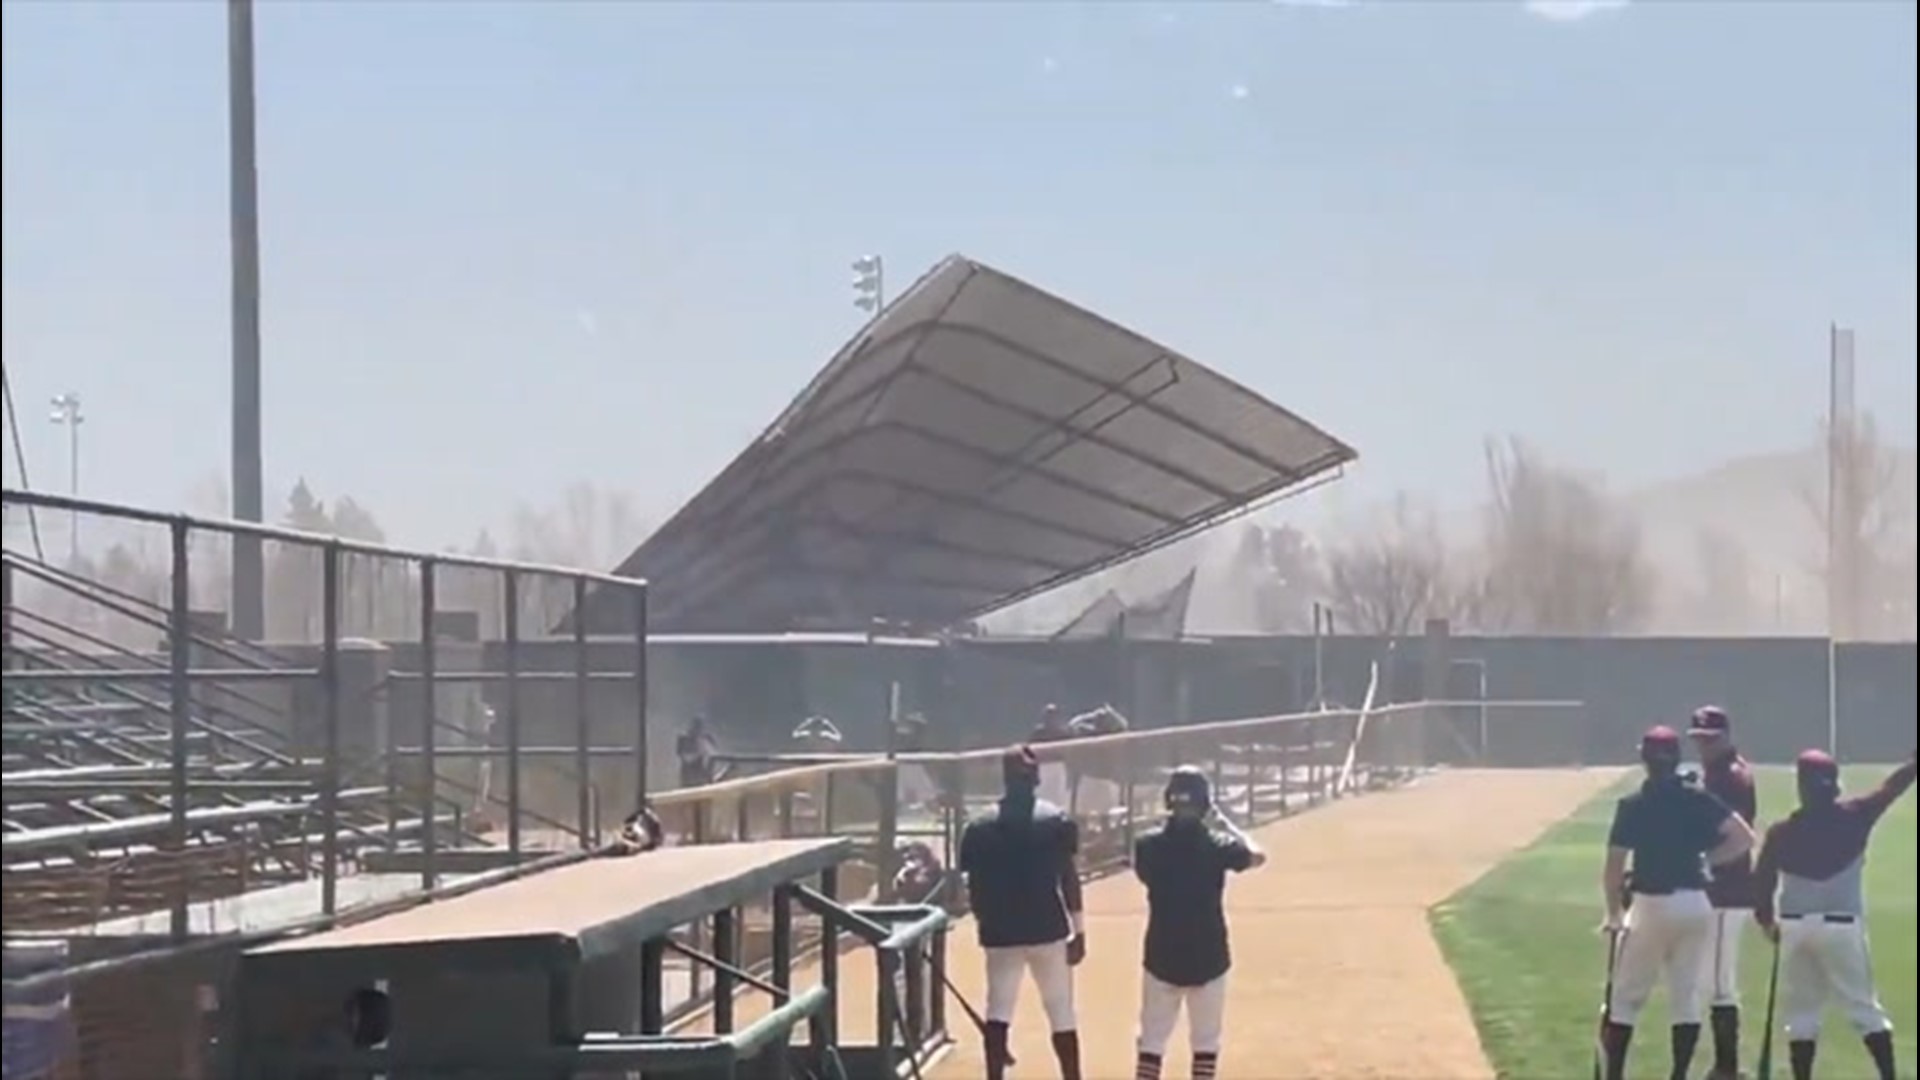 The roof of batting cages at Kokernot Field in Alpine, Texas, fell victim to strong winds on March 14, just before a Sul Ross State University baseball game.